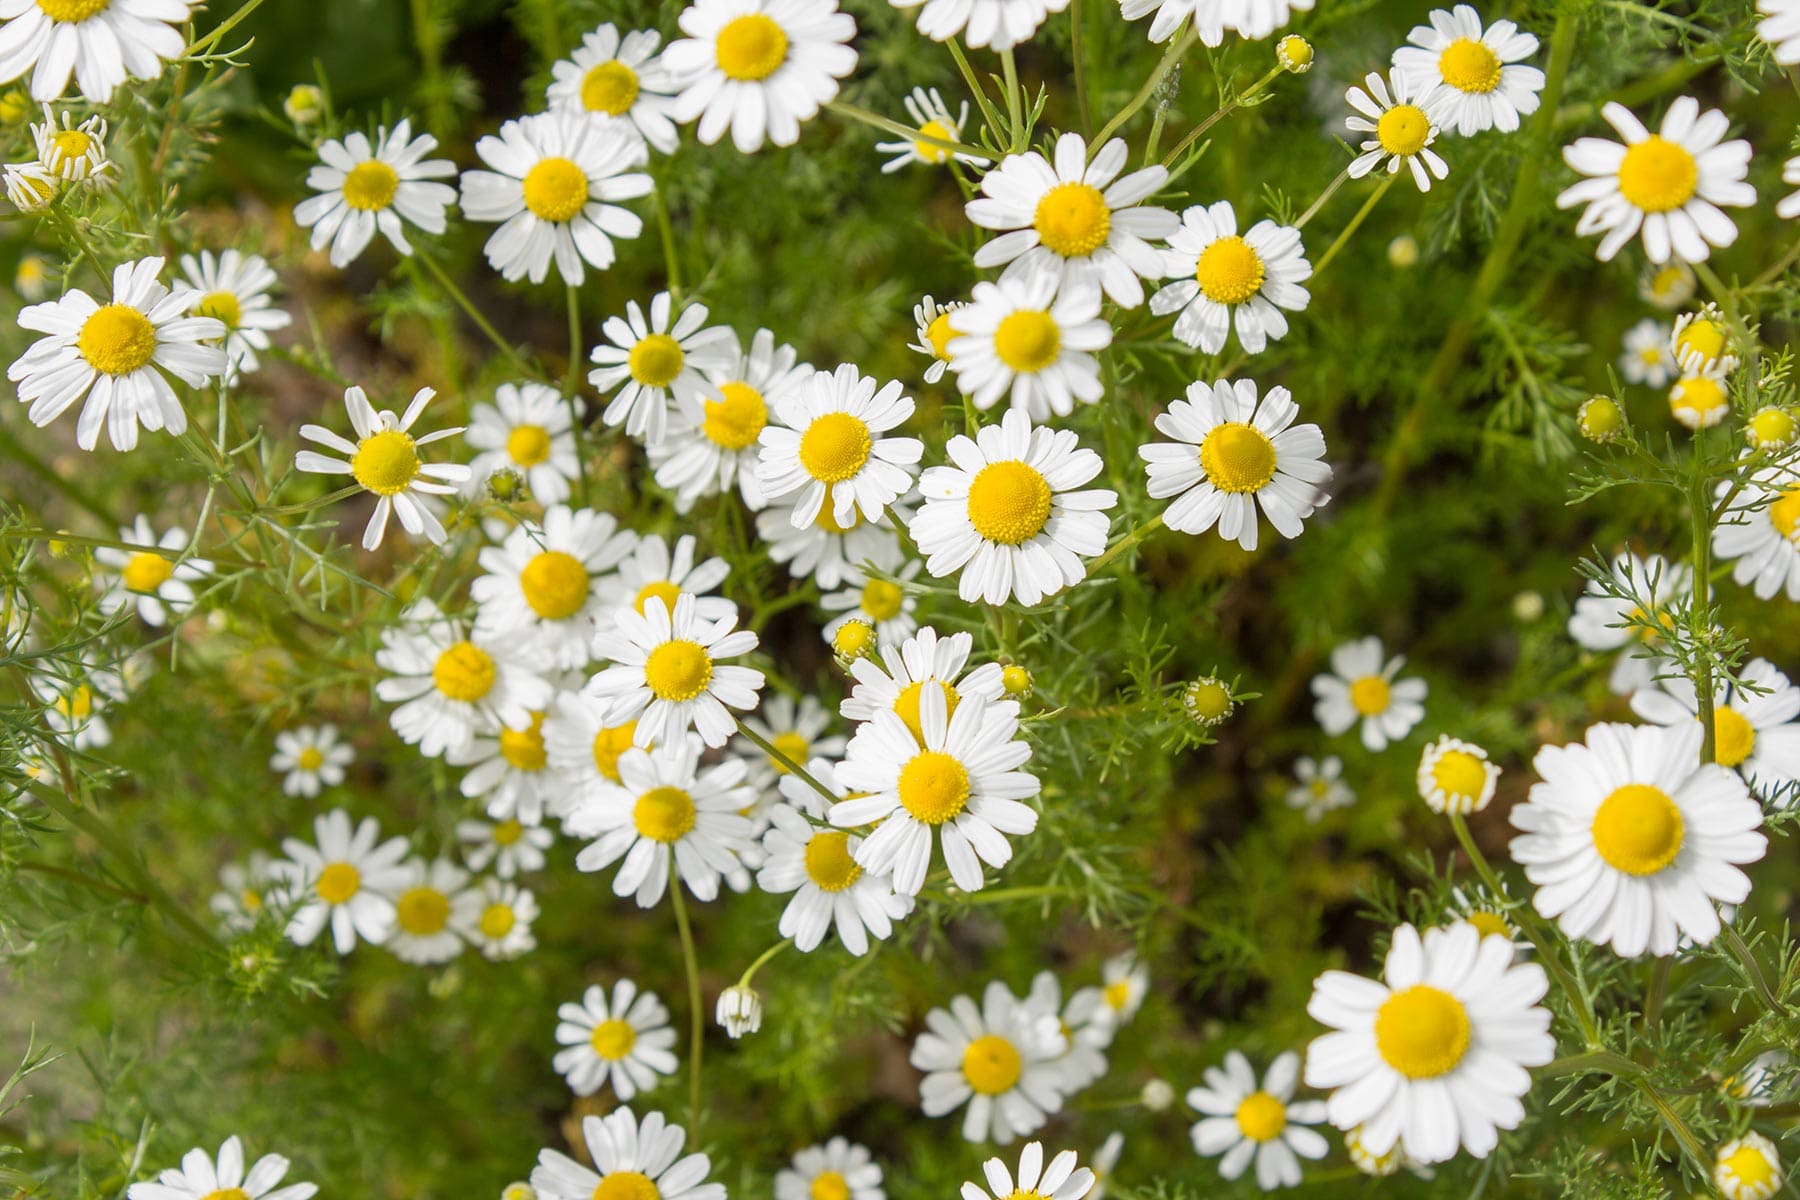 15 plants help you reduce stress, anxiety and depression - 73